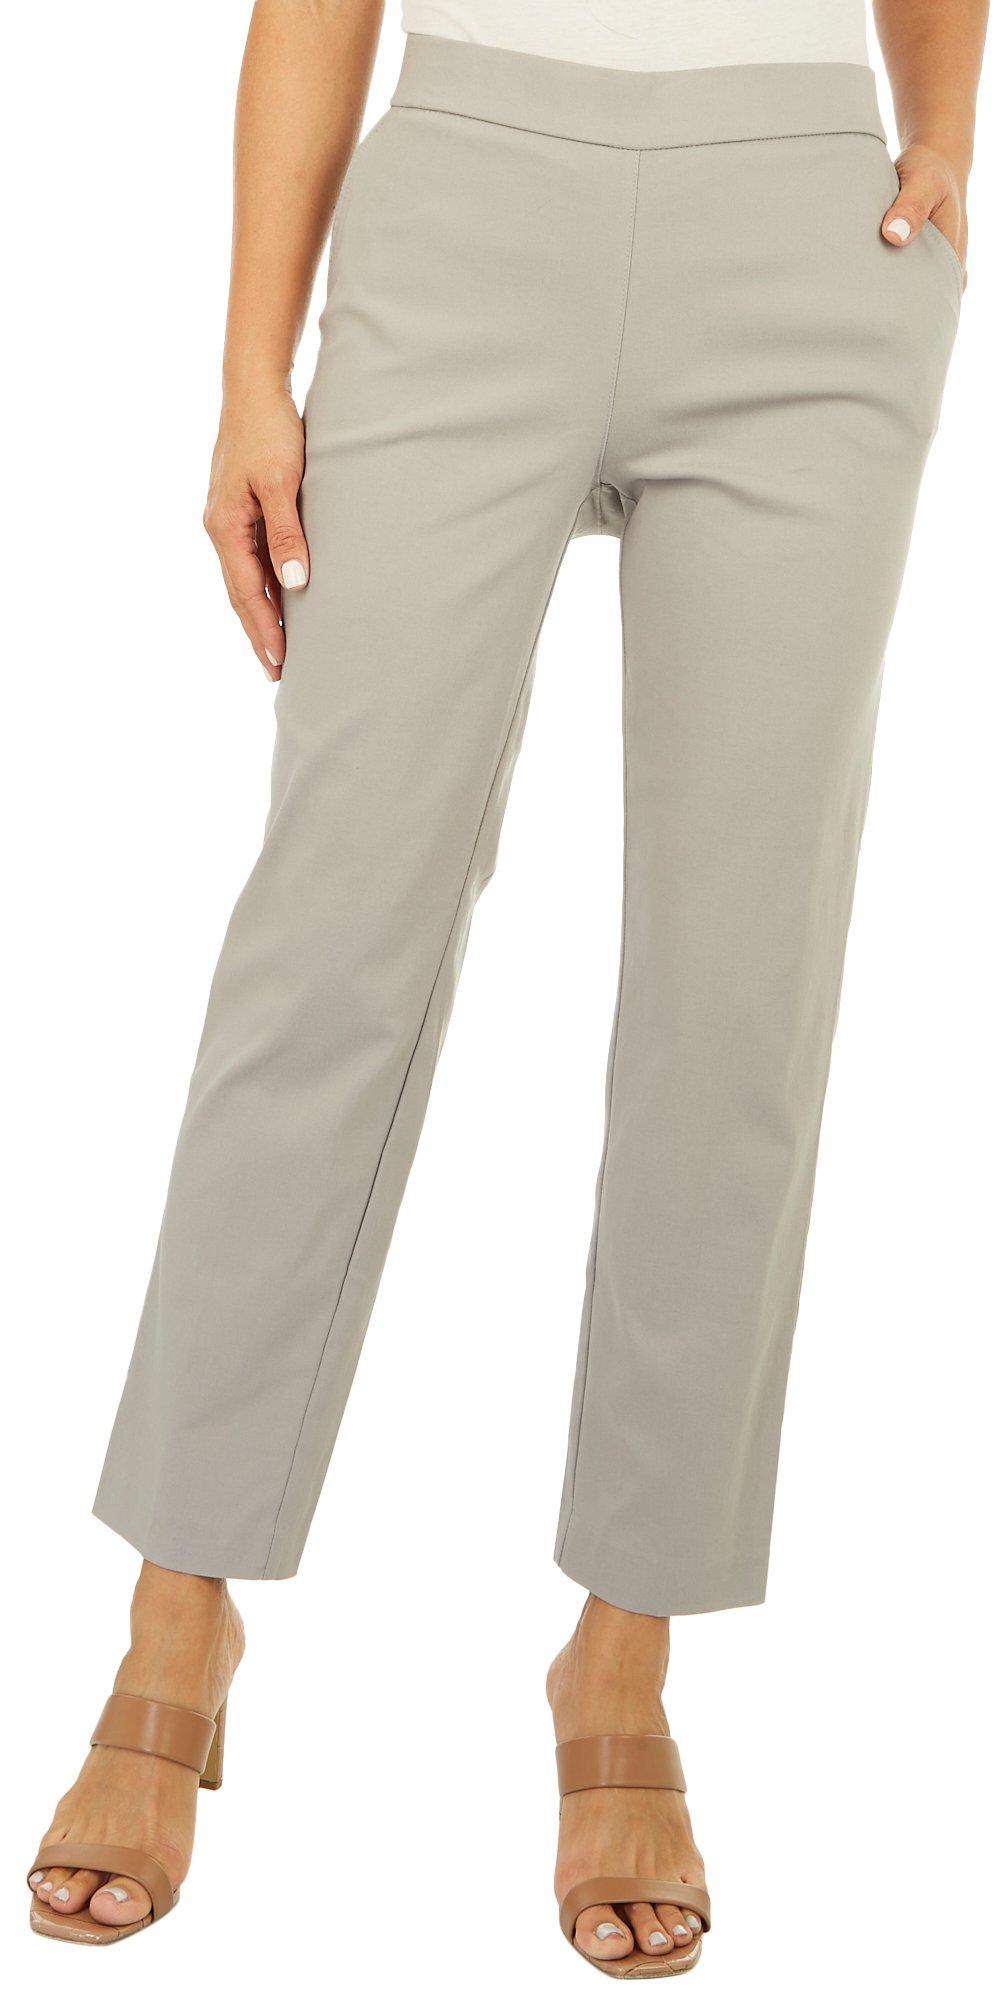 Petite 28 in. Solid Tummy Control Pocket Pant